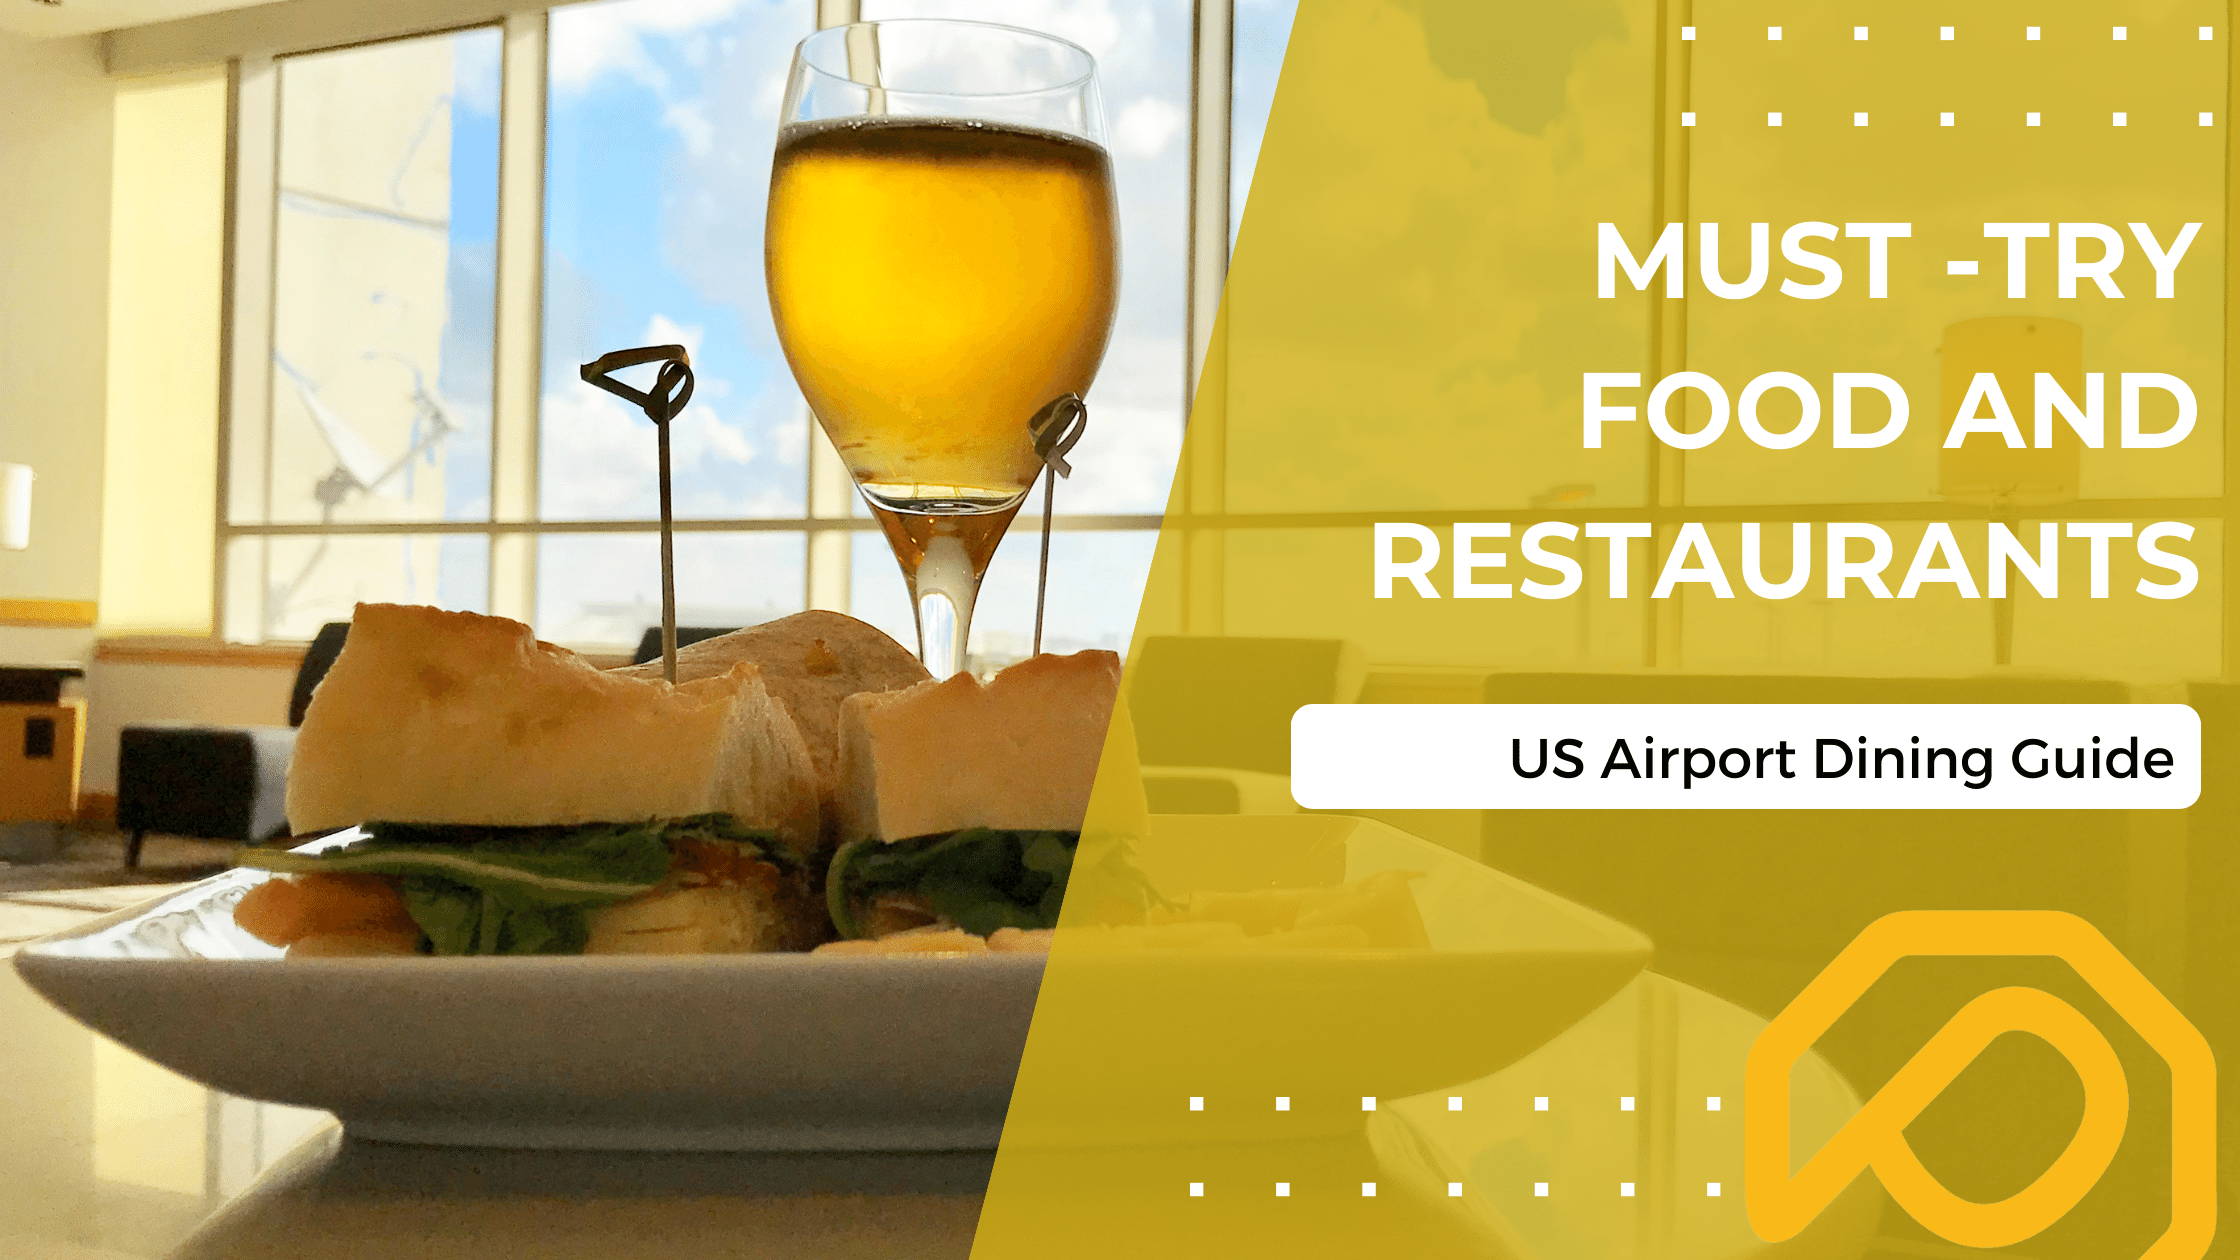 must-try food and restaurants at U.S. airports